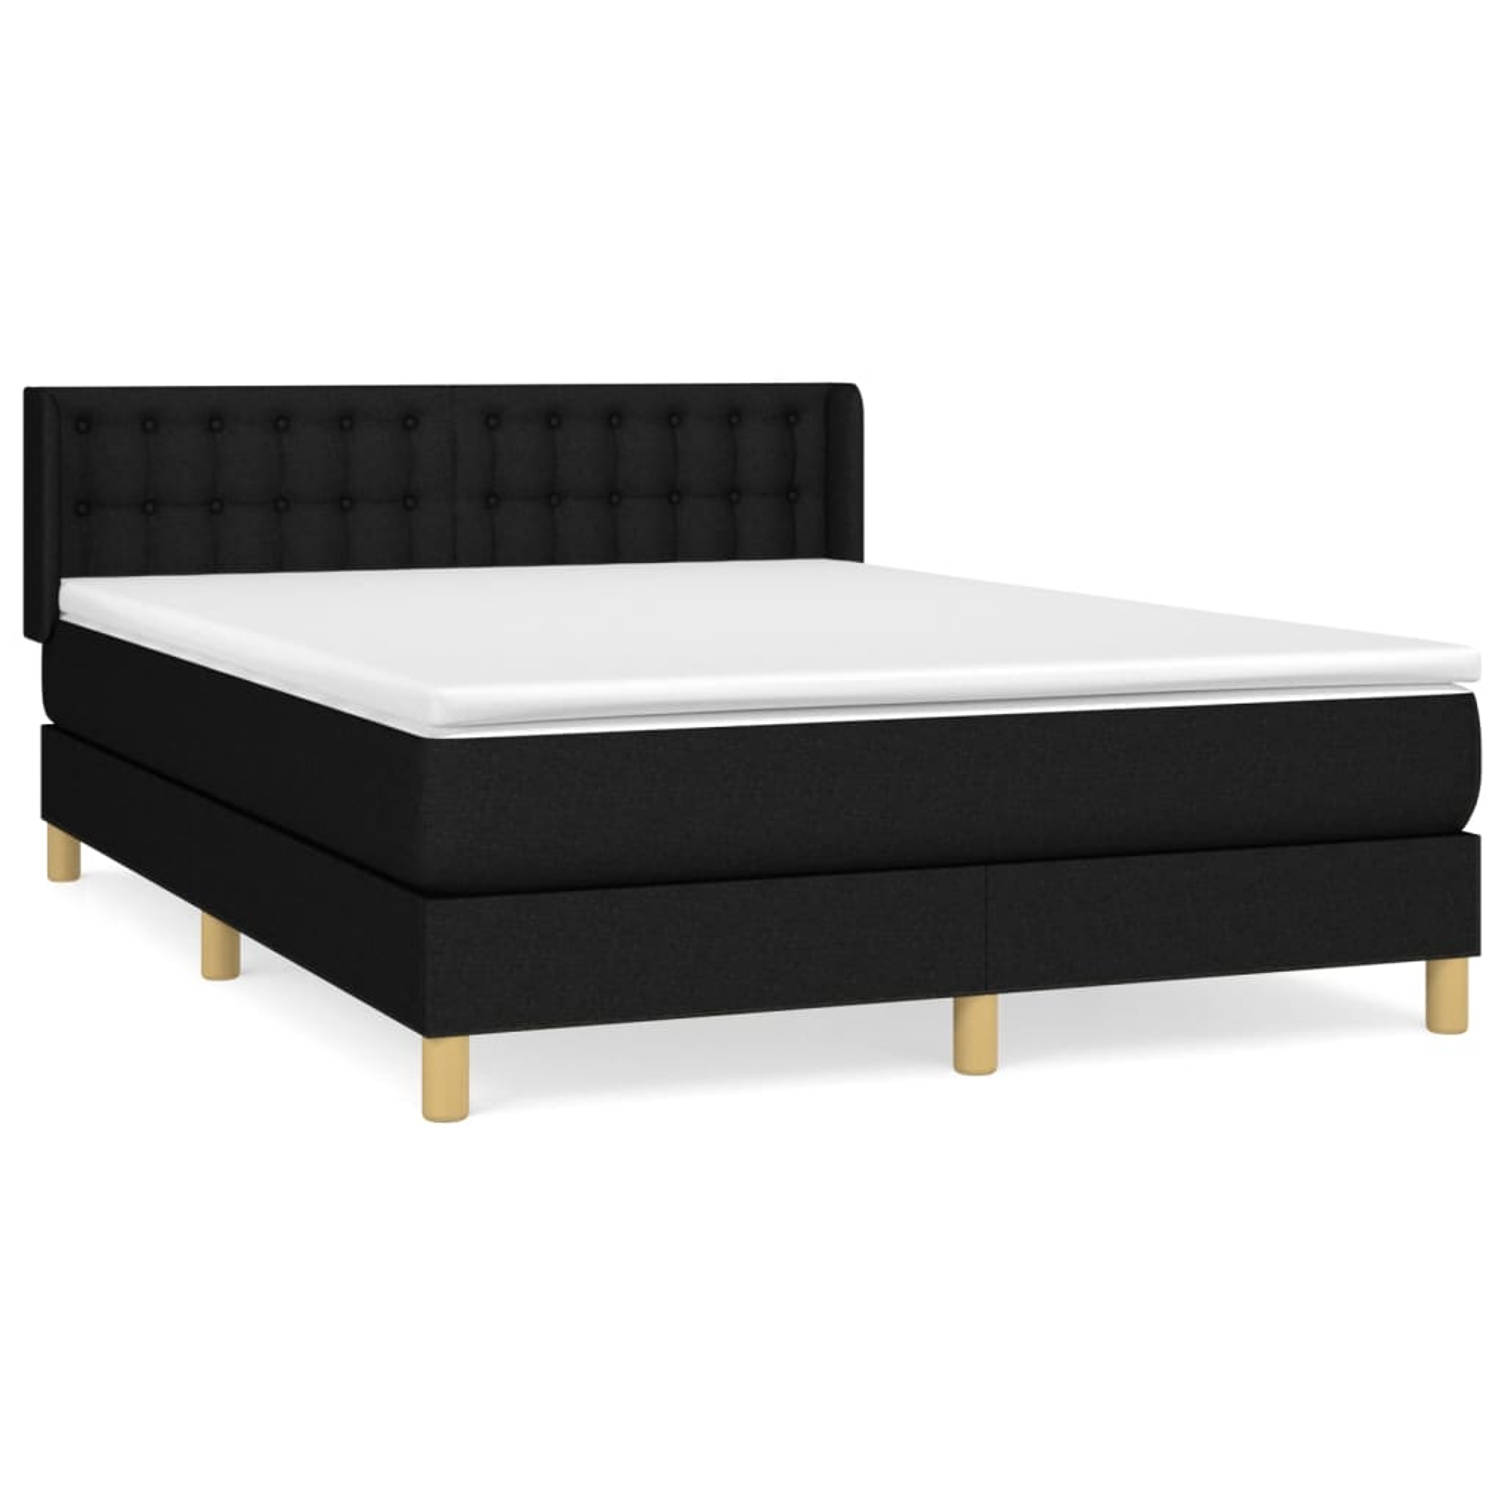 The Living Store Boxspringbed - Comfort Sleep - Bed - 203 x 147 x 78/88 cm - Zwart - Stof (100% polyester)